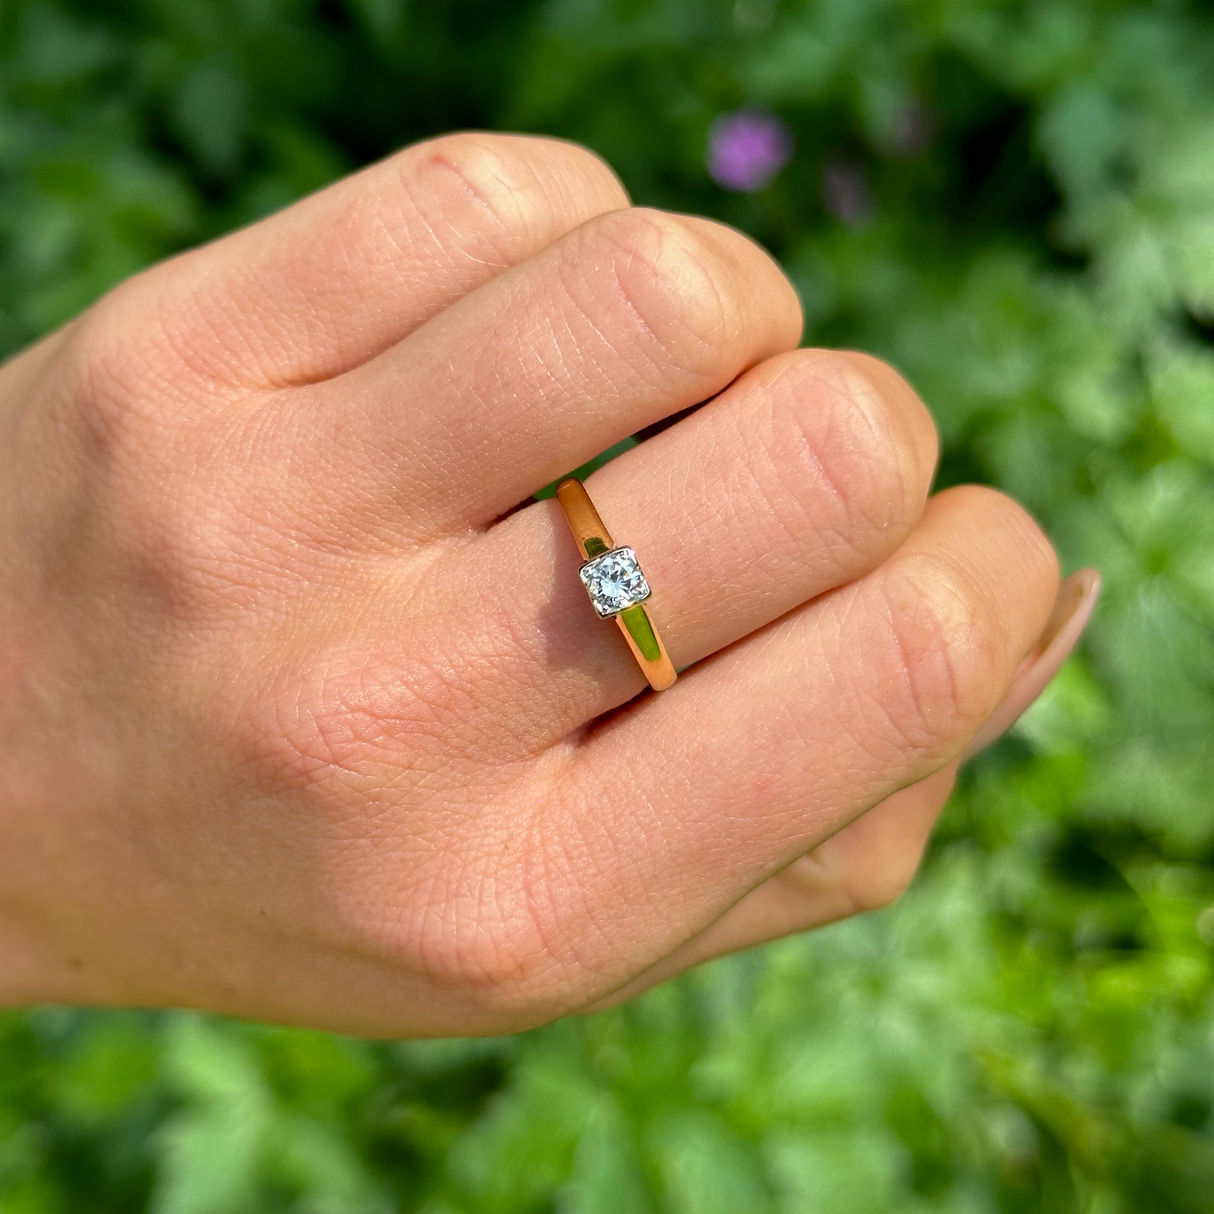 Vintage Solitaire Diamond Engagement Ring, 18ct Yellow Gold and Platinum worn on hand.